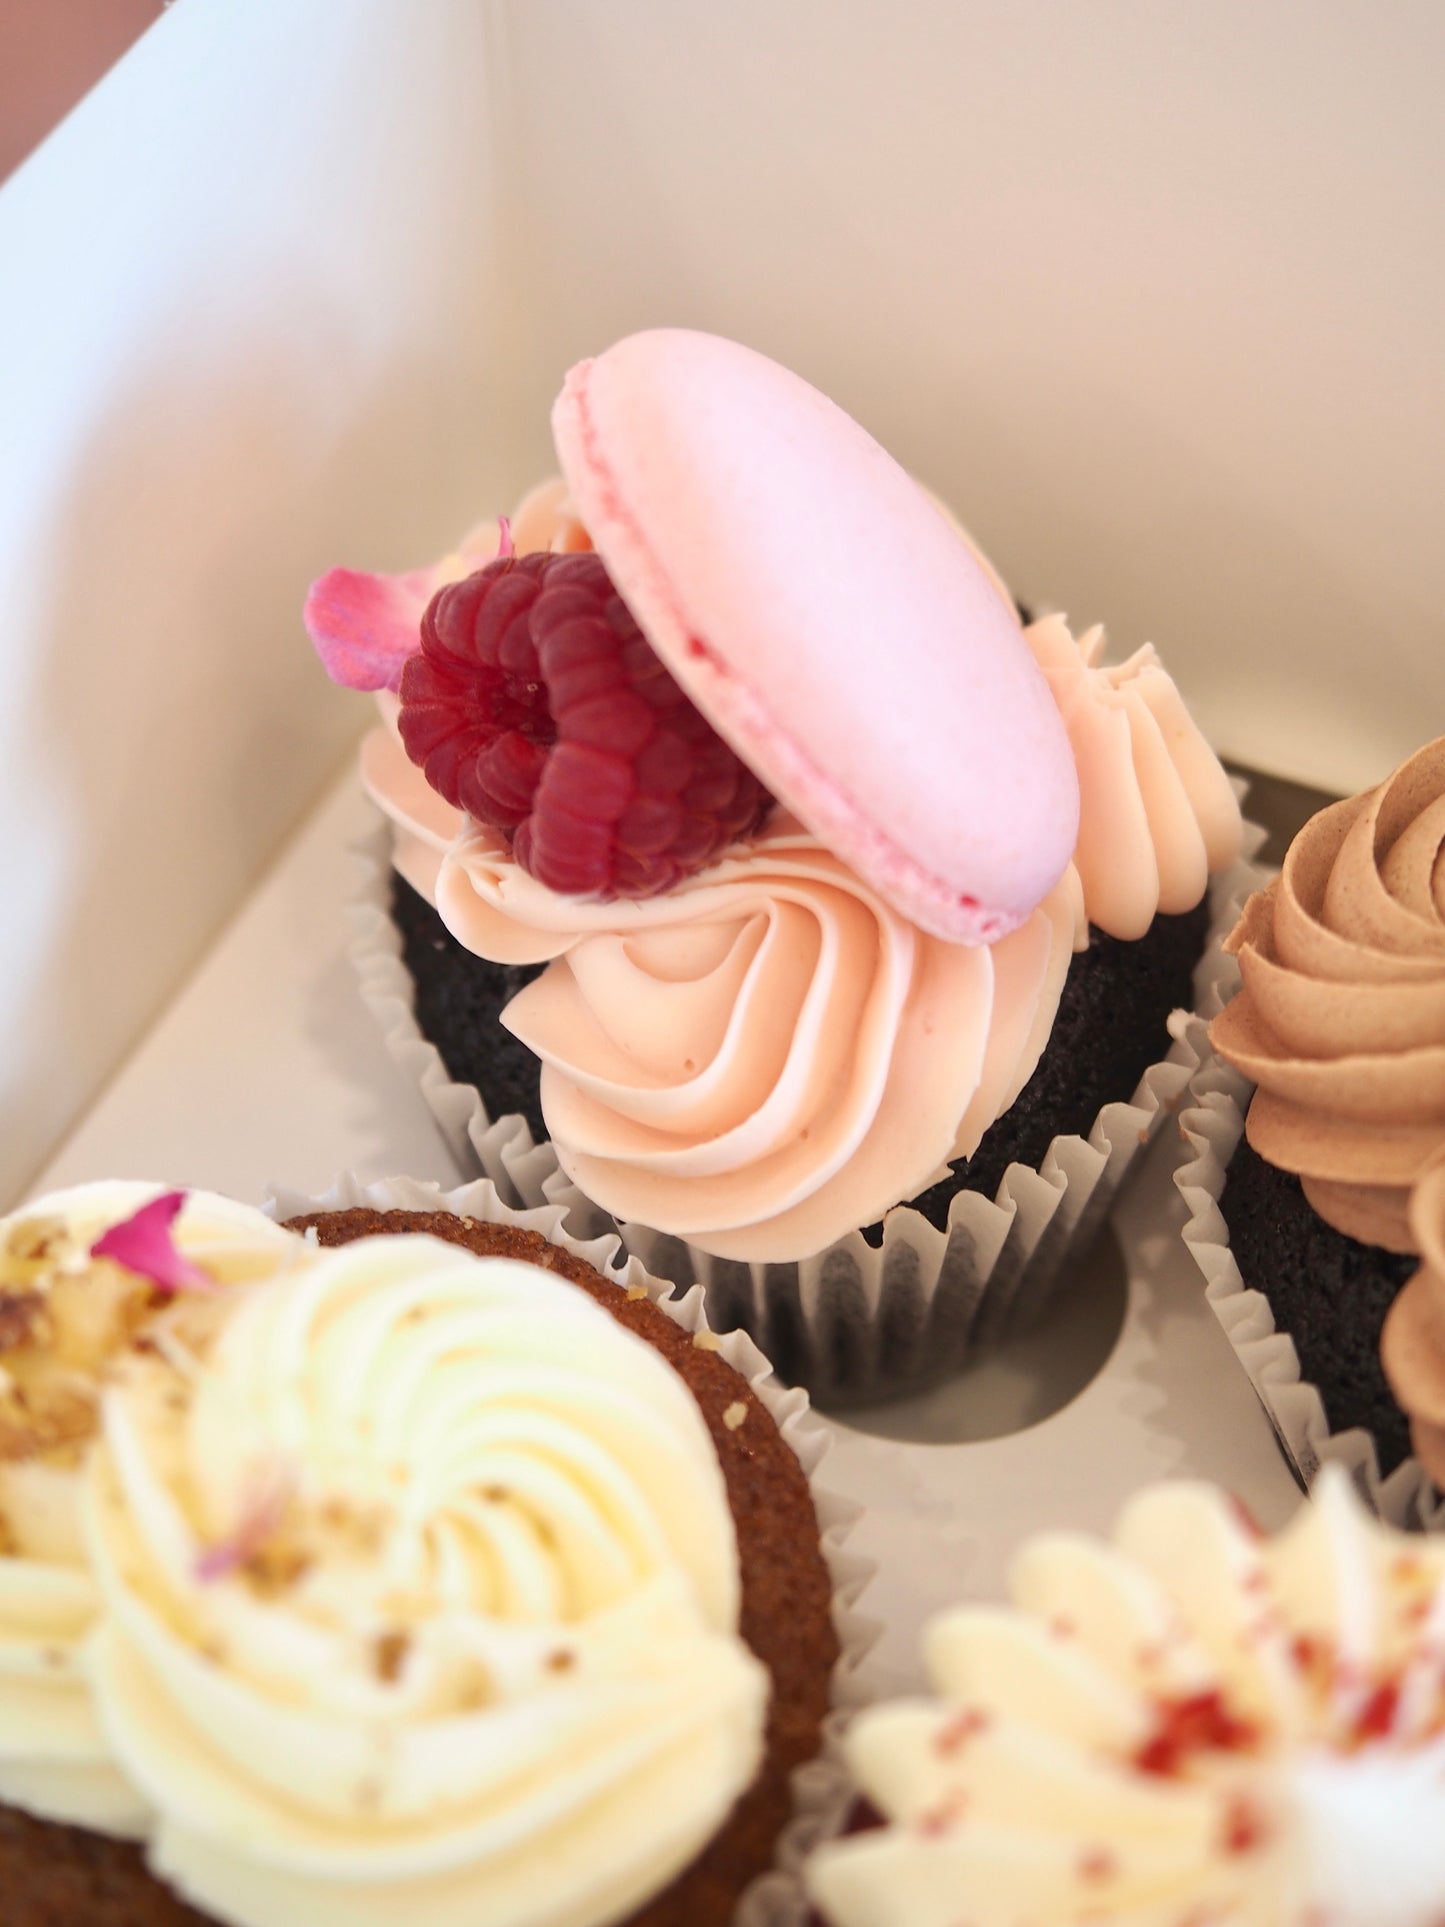 Mixed Cupcake Pack - Cafe Favourites